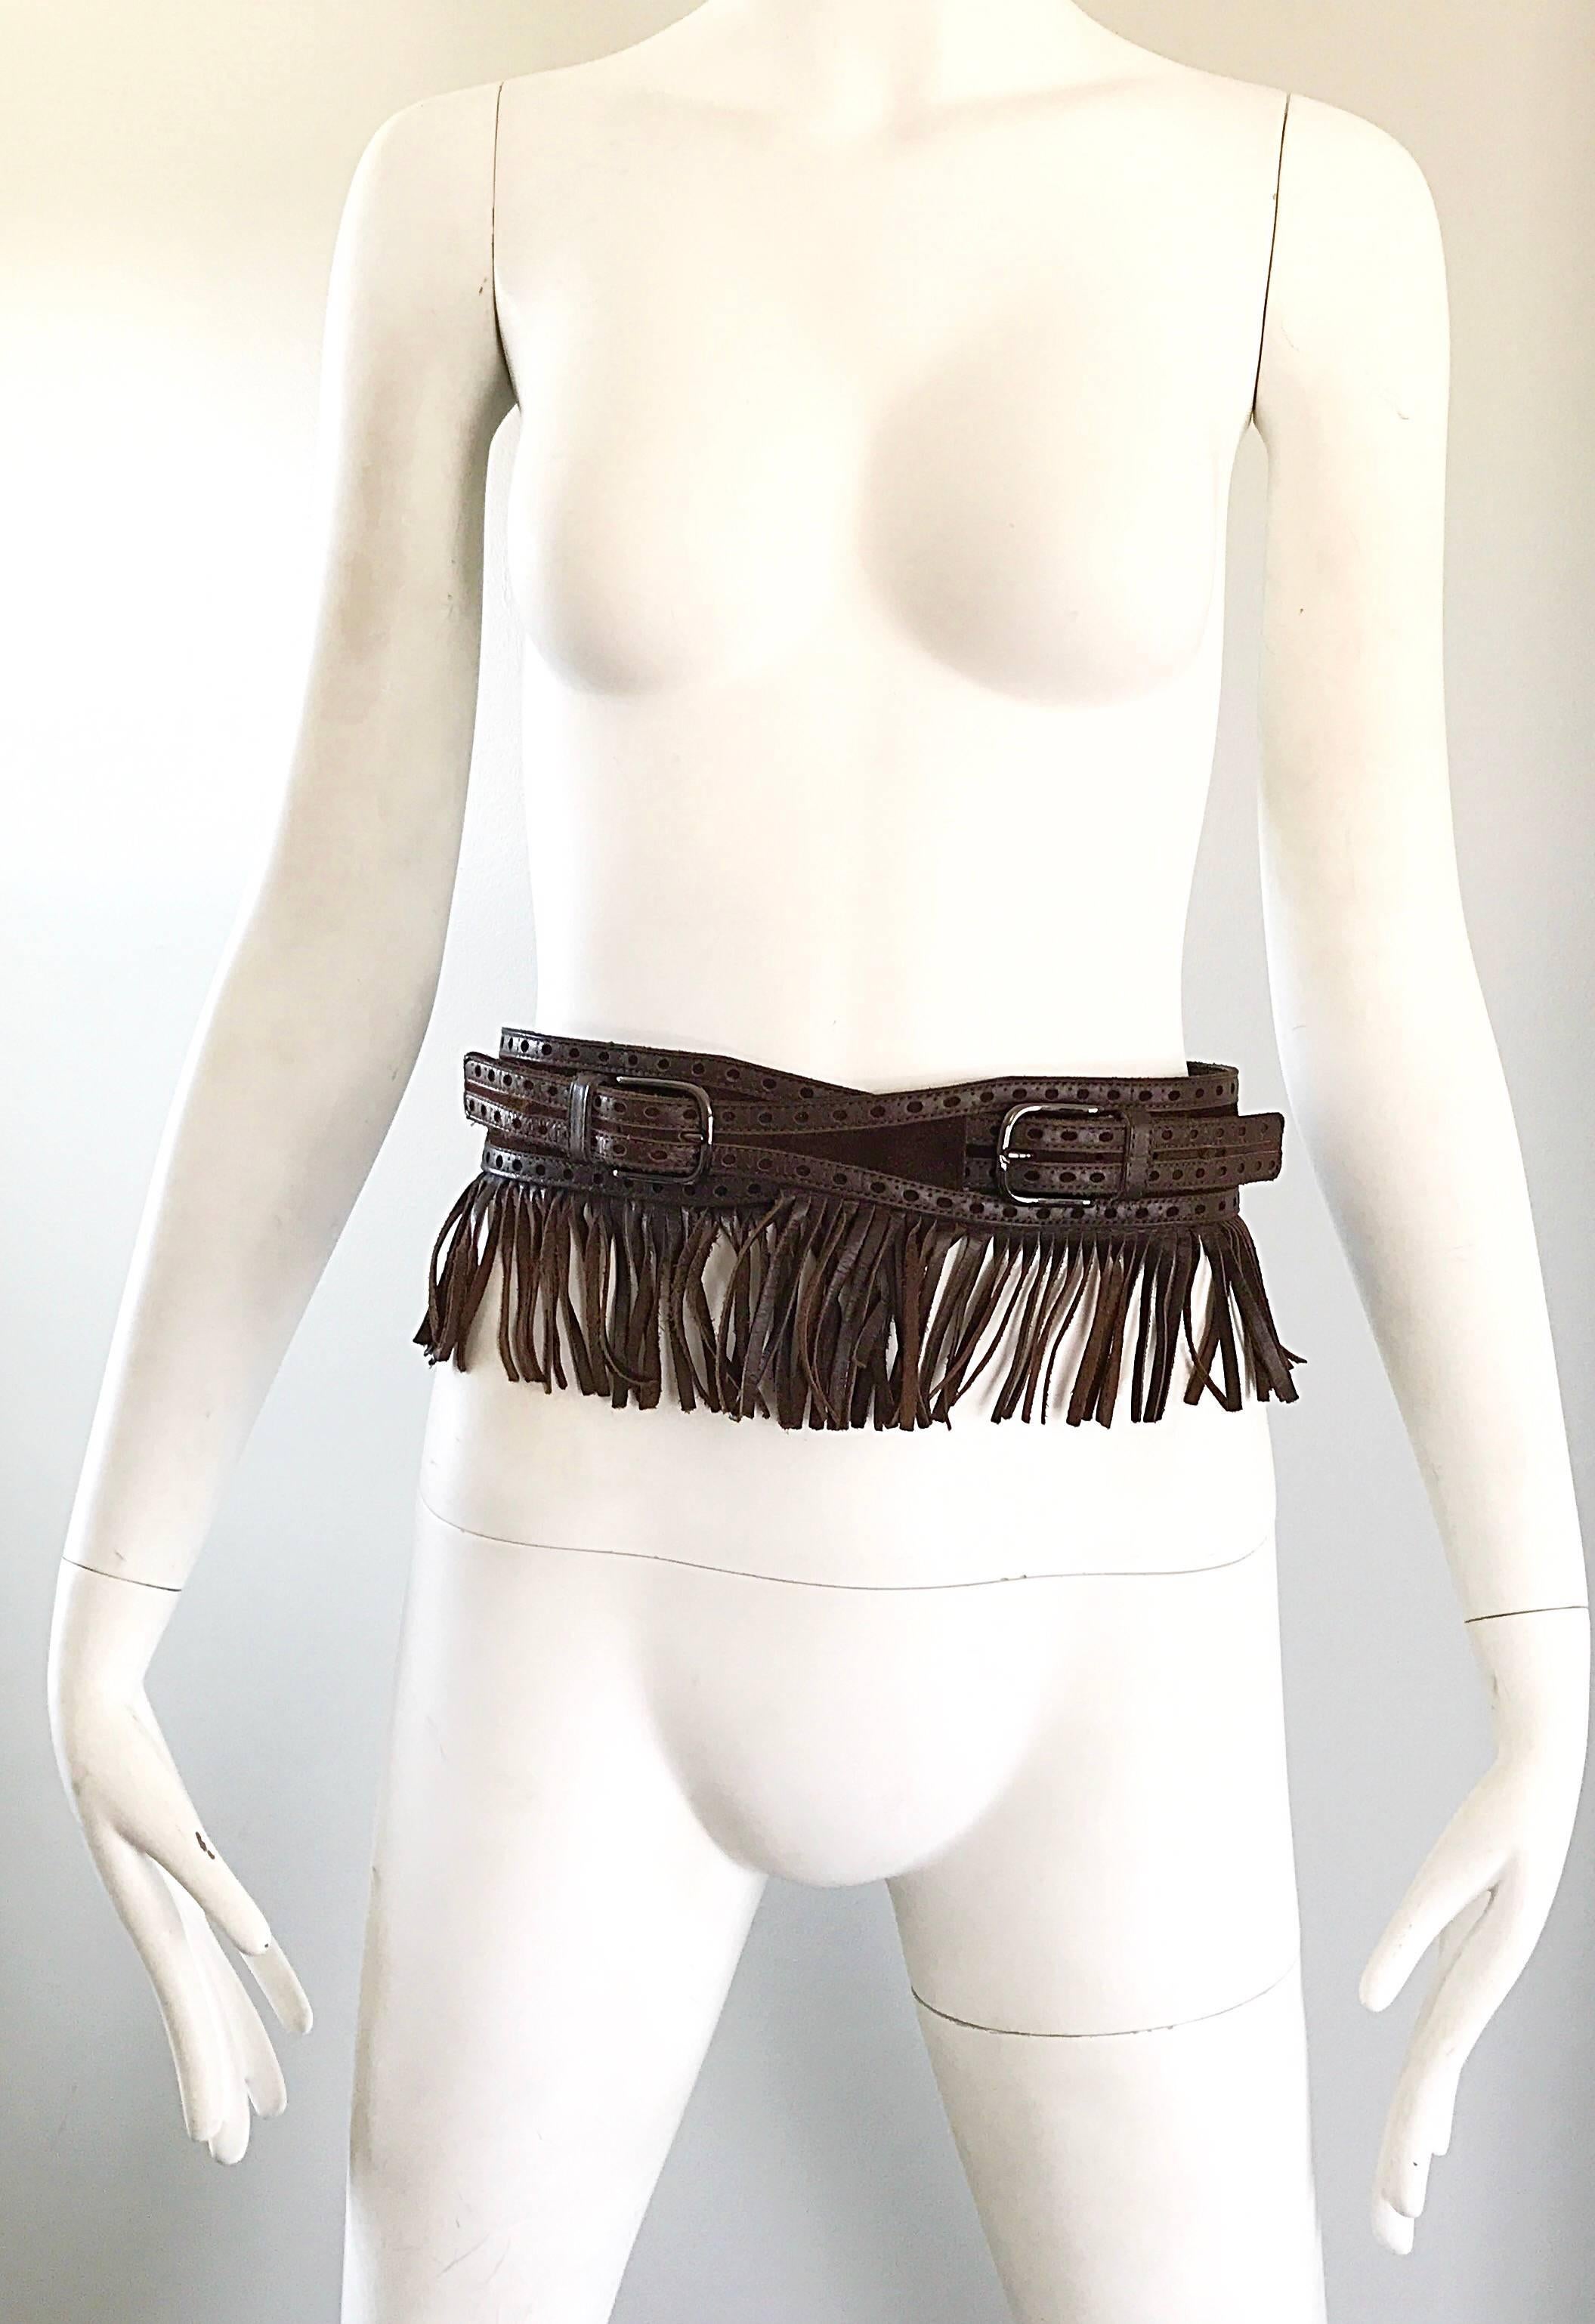 Rare chic 1970s YSL YVES SAINT LAURENT Paris brown leather and suede fringe boho belt! Features brown leather and suede with leather fringe. Double buckle closure will fit an array of sizes. Great with jeans, shorts, a skirt or a dress. 
In great